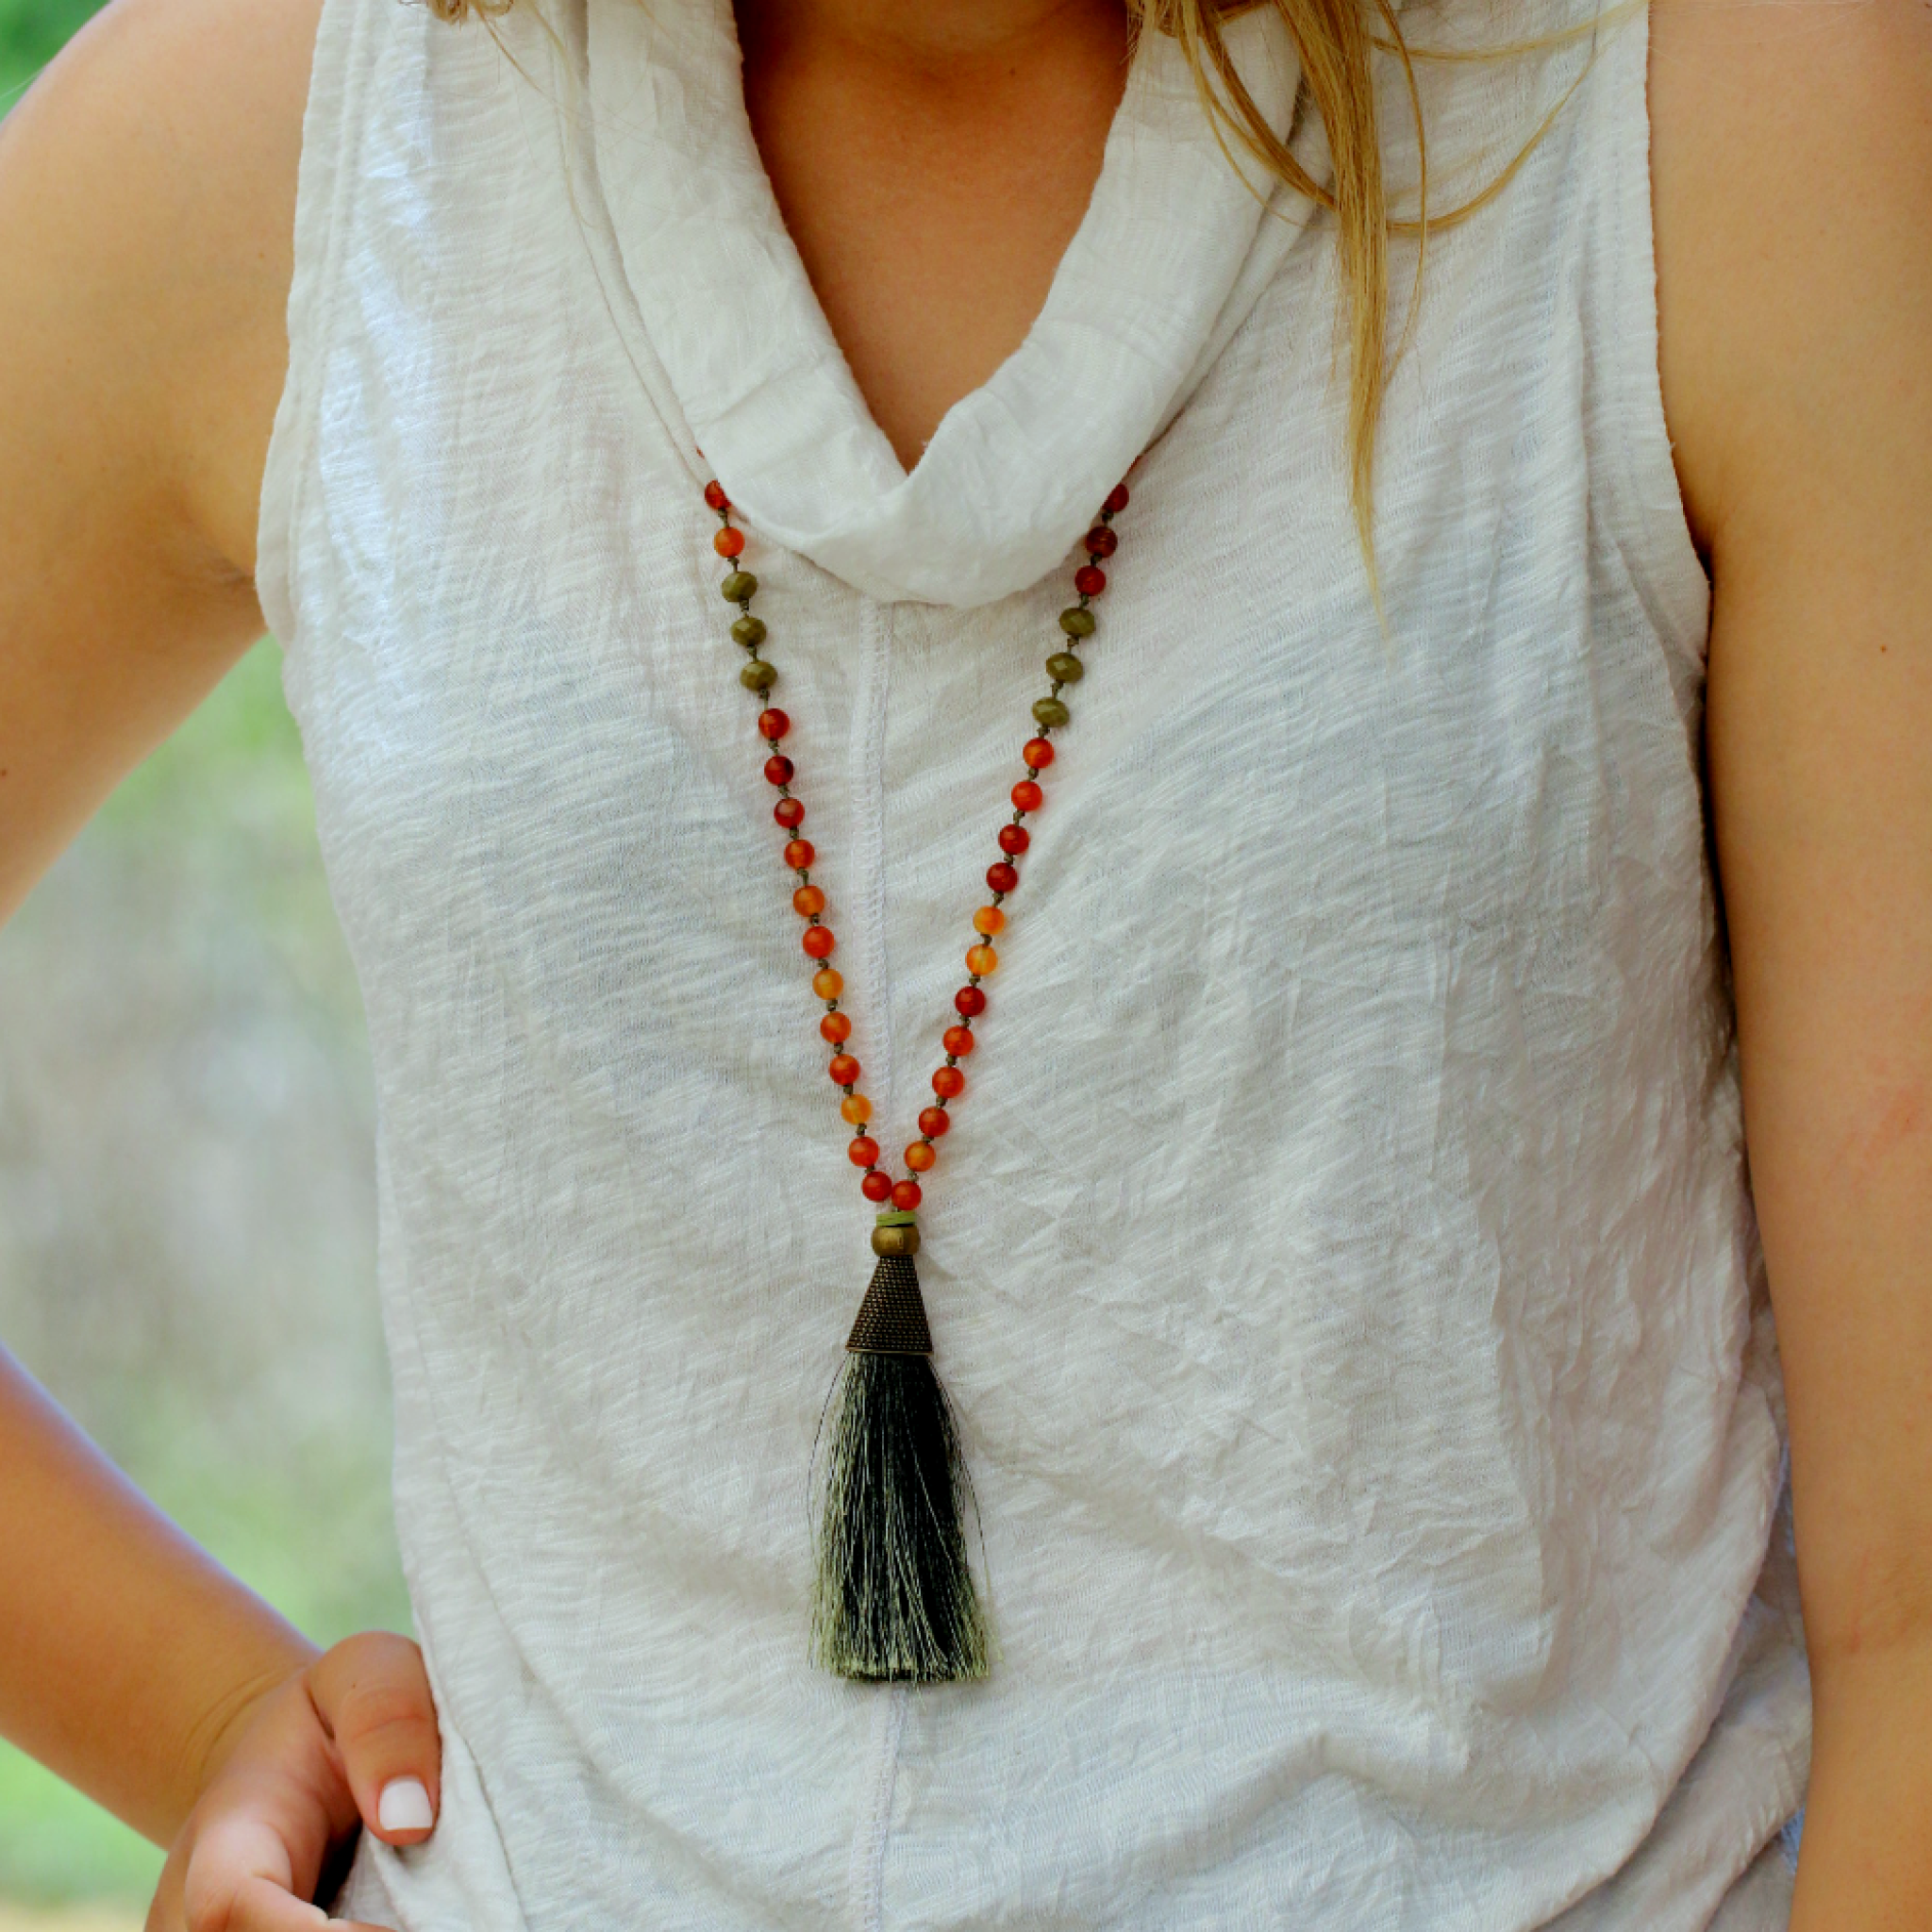 Colorful Mala Beads Tassel Necklace Necklaces